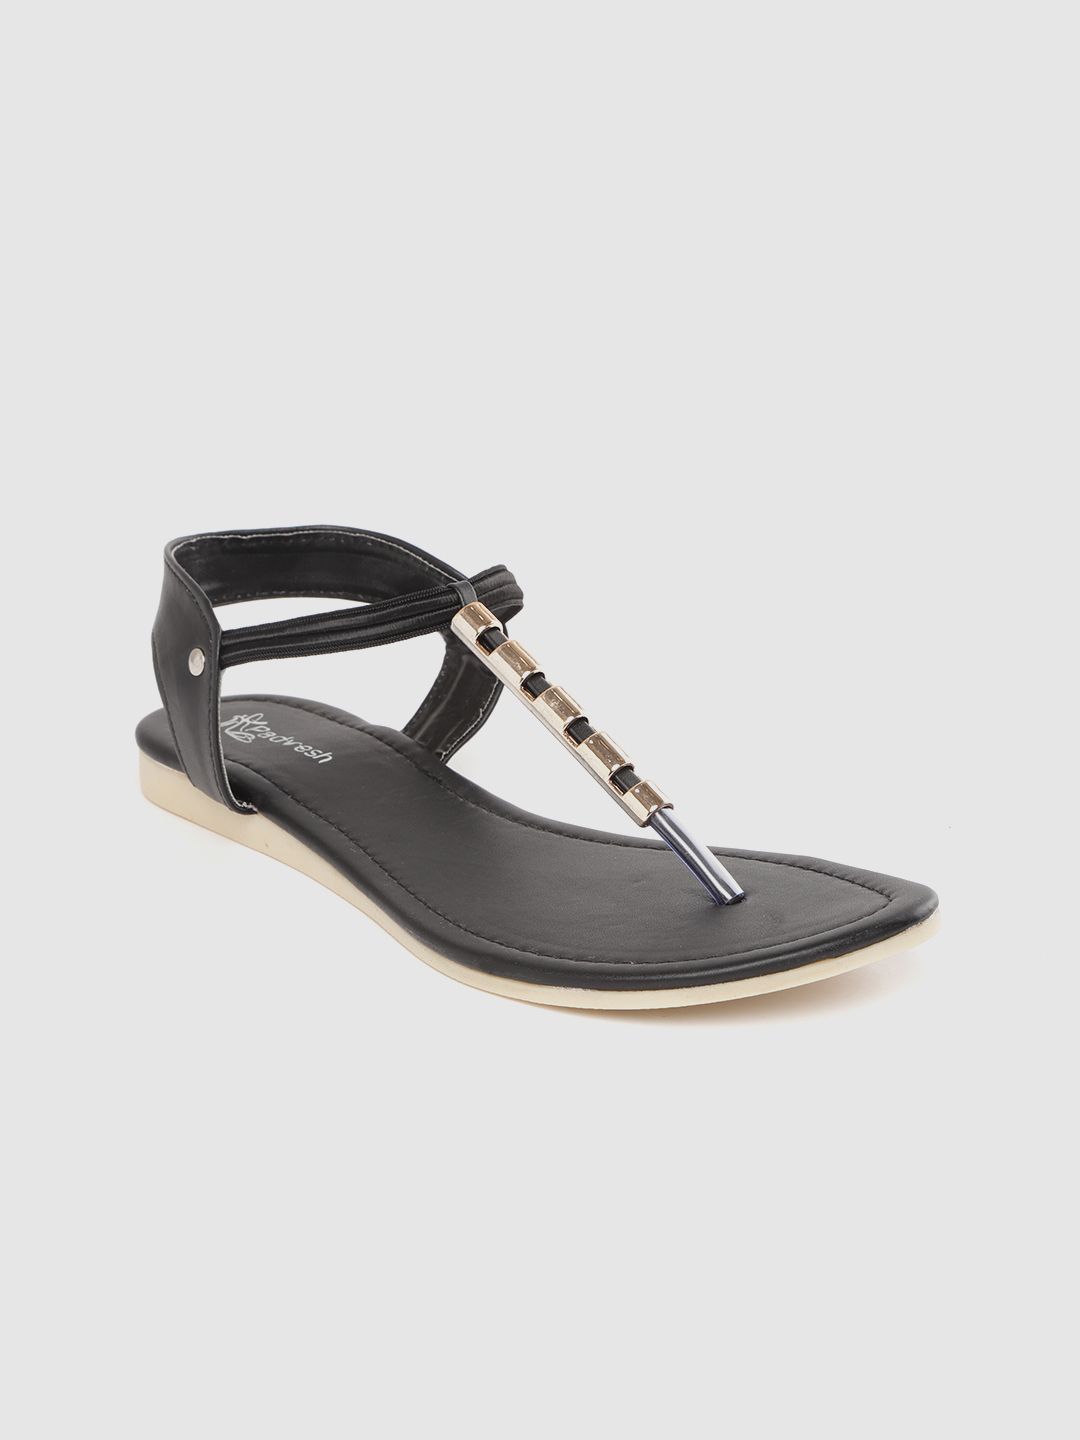 Padvesh Women Black Solid T-Strap Flats with Metallic Detail Price in India